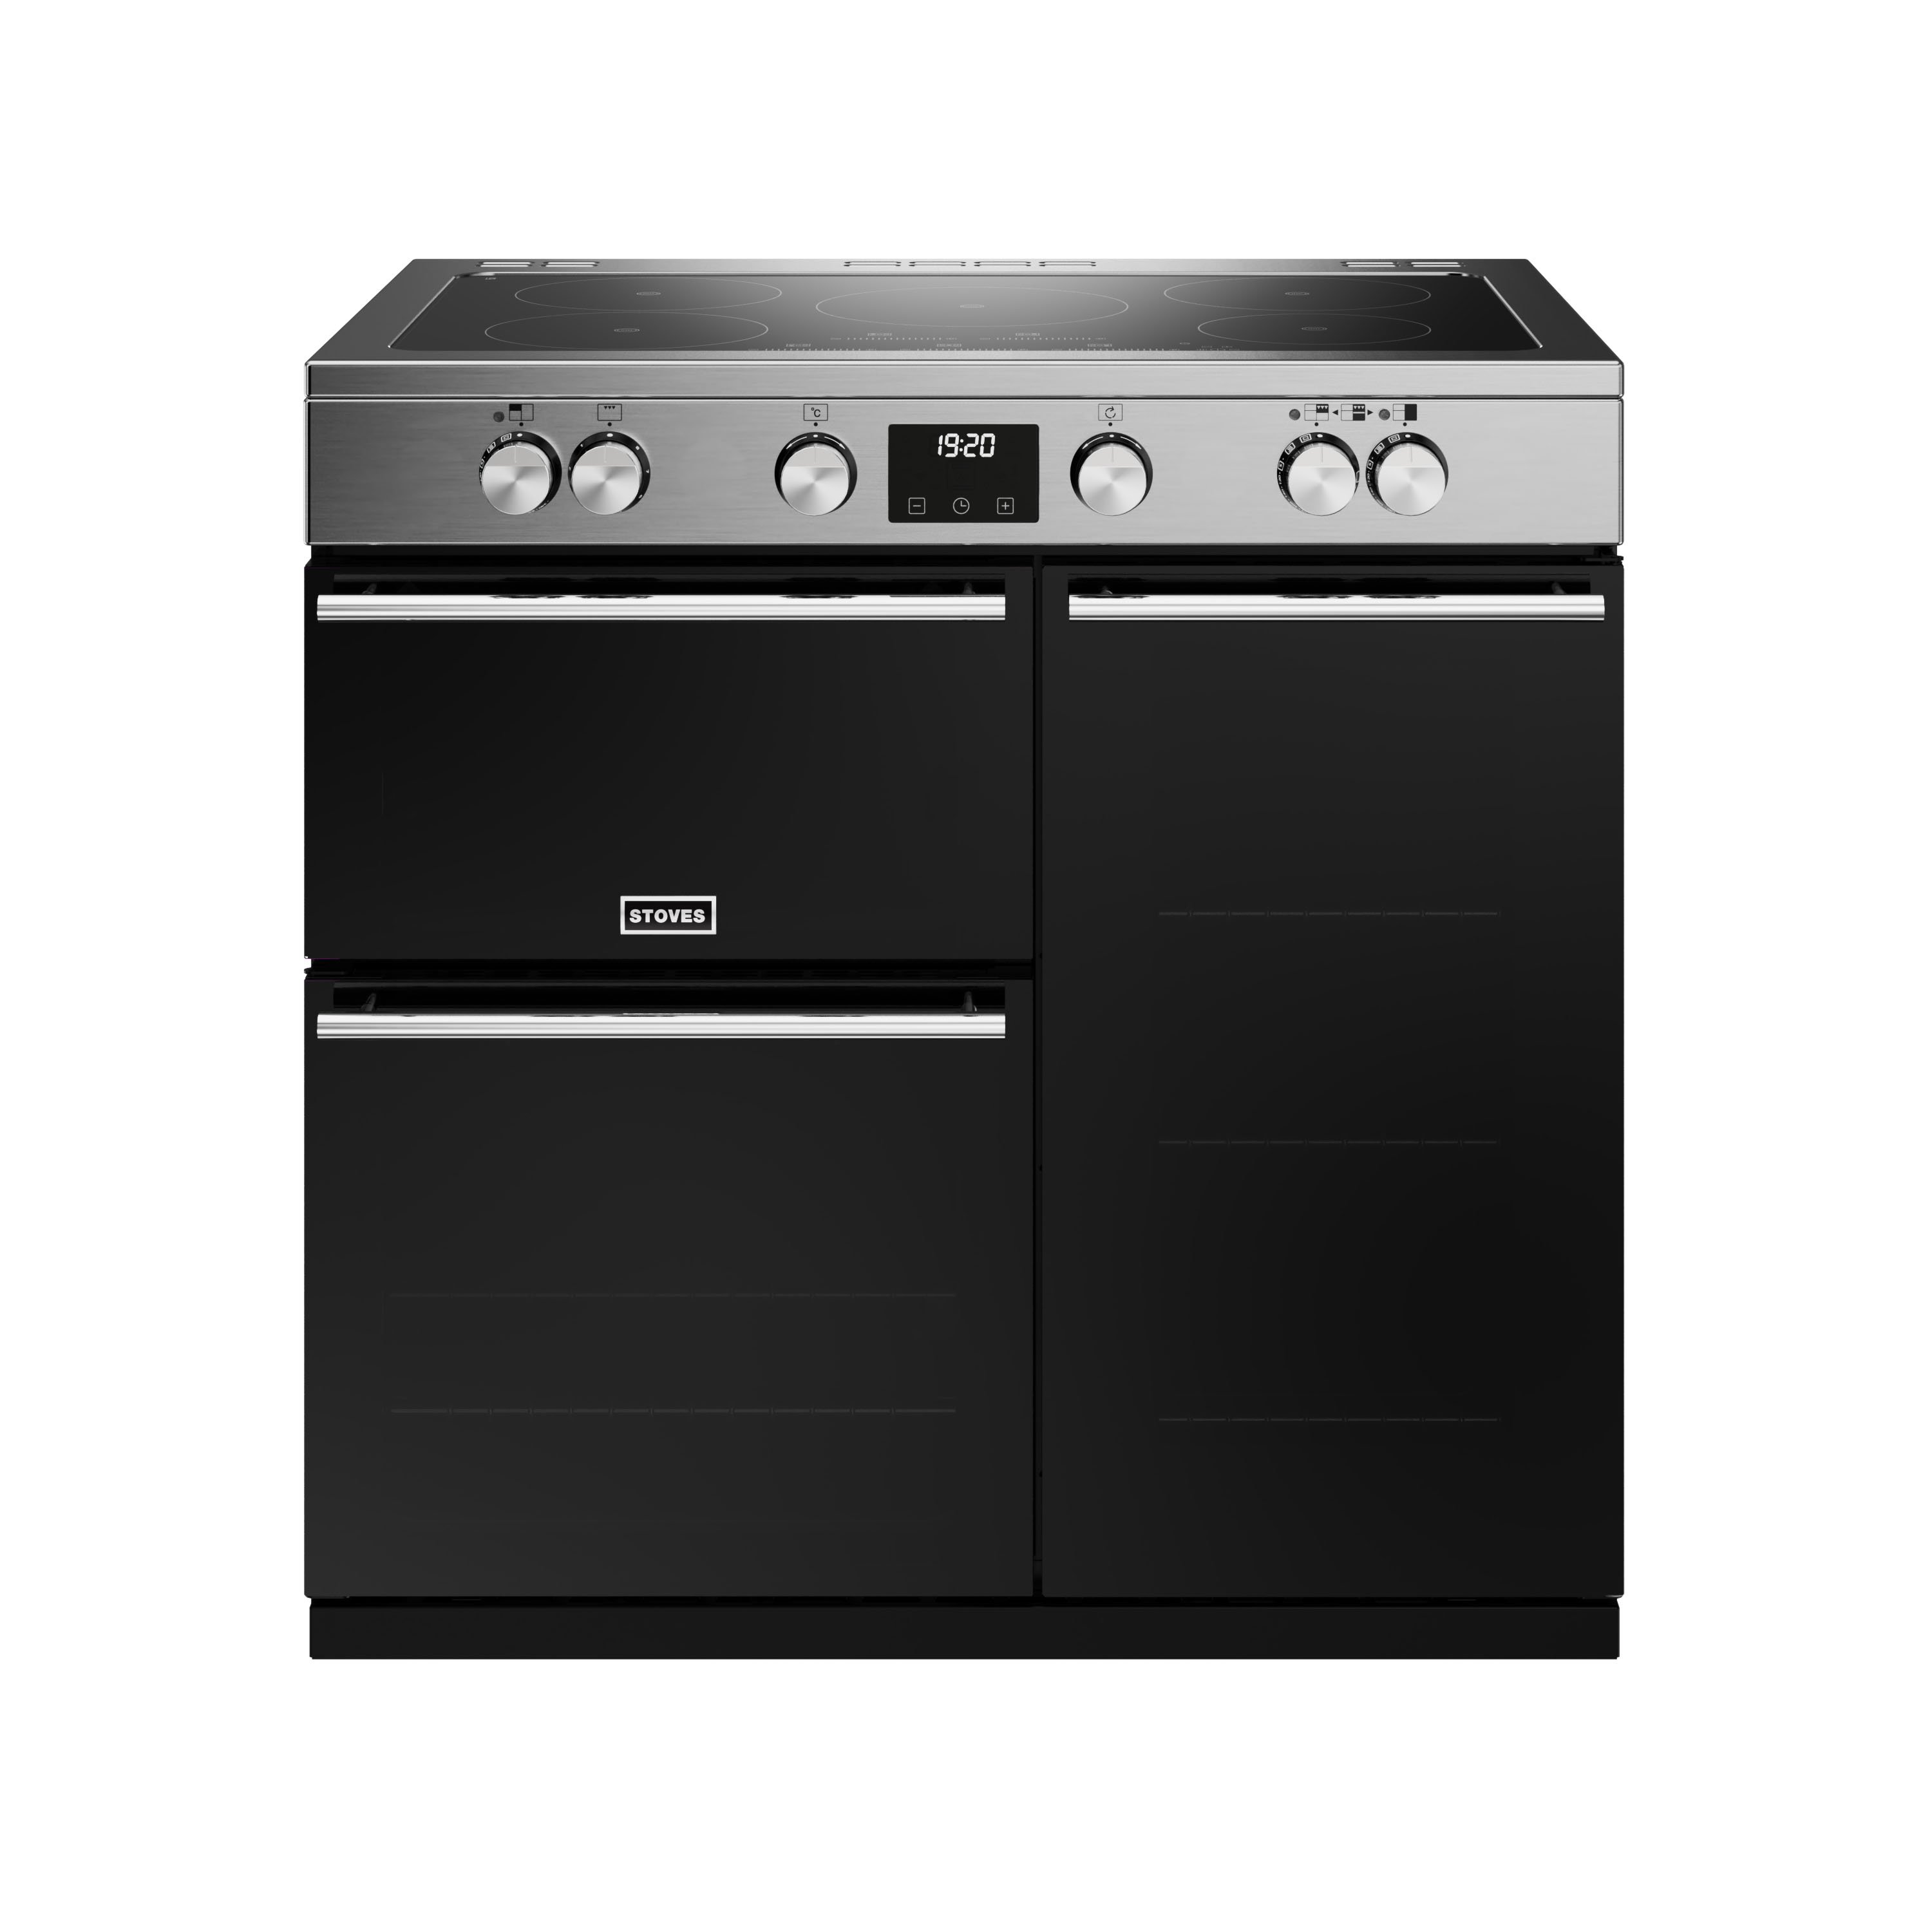 90cm electric induction range cooker with a 5 zone touch control hob, conventional oven & grill, multifunction main oven with TrueTemp digital thermostat, and tall fanned oven with PROFLEX™